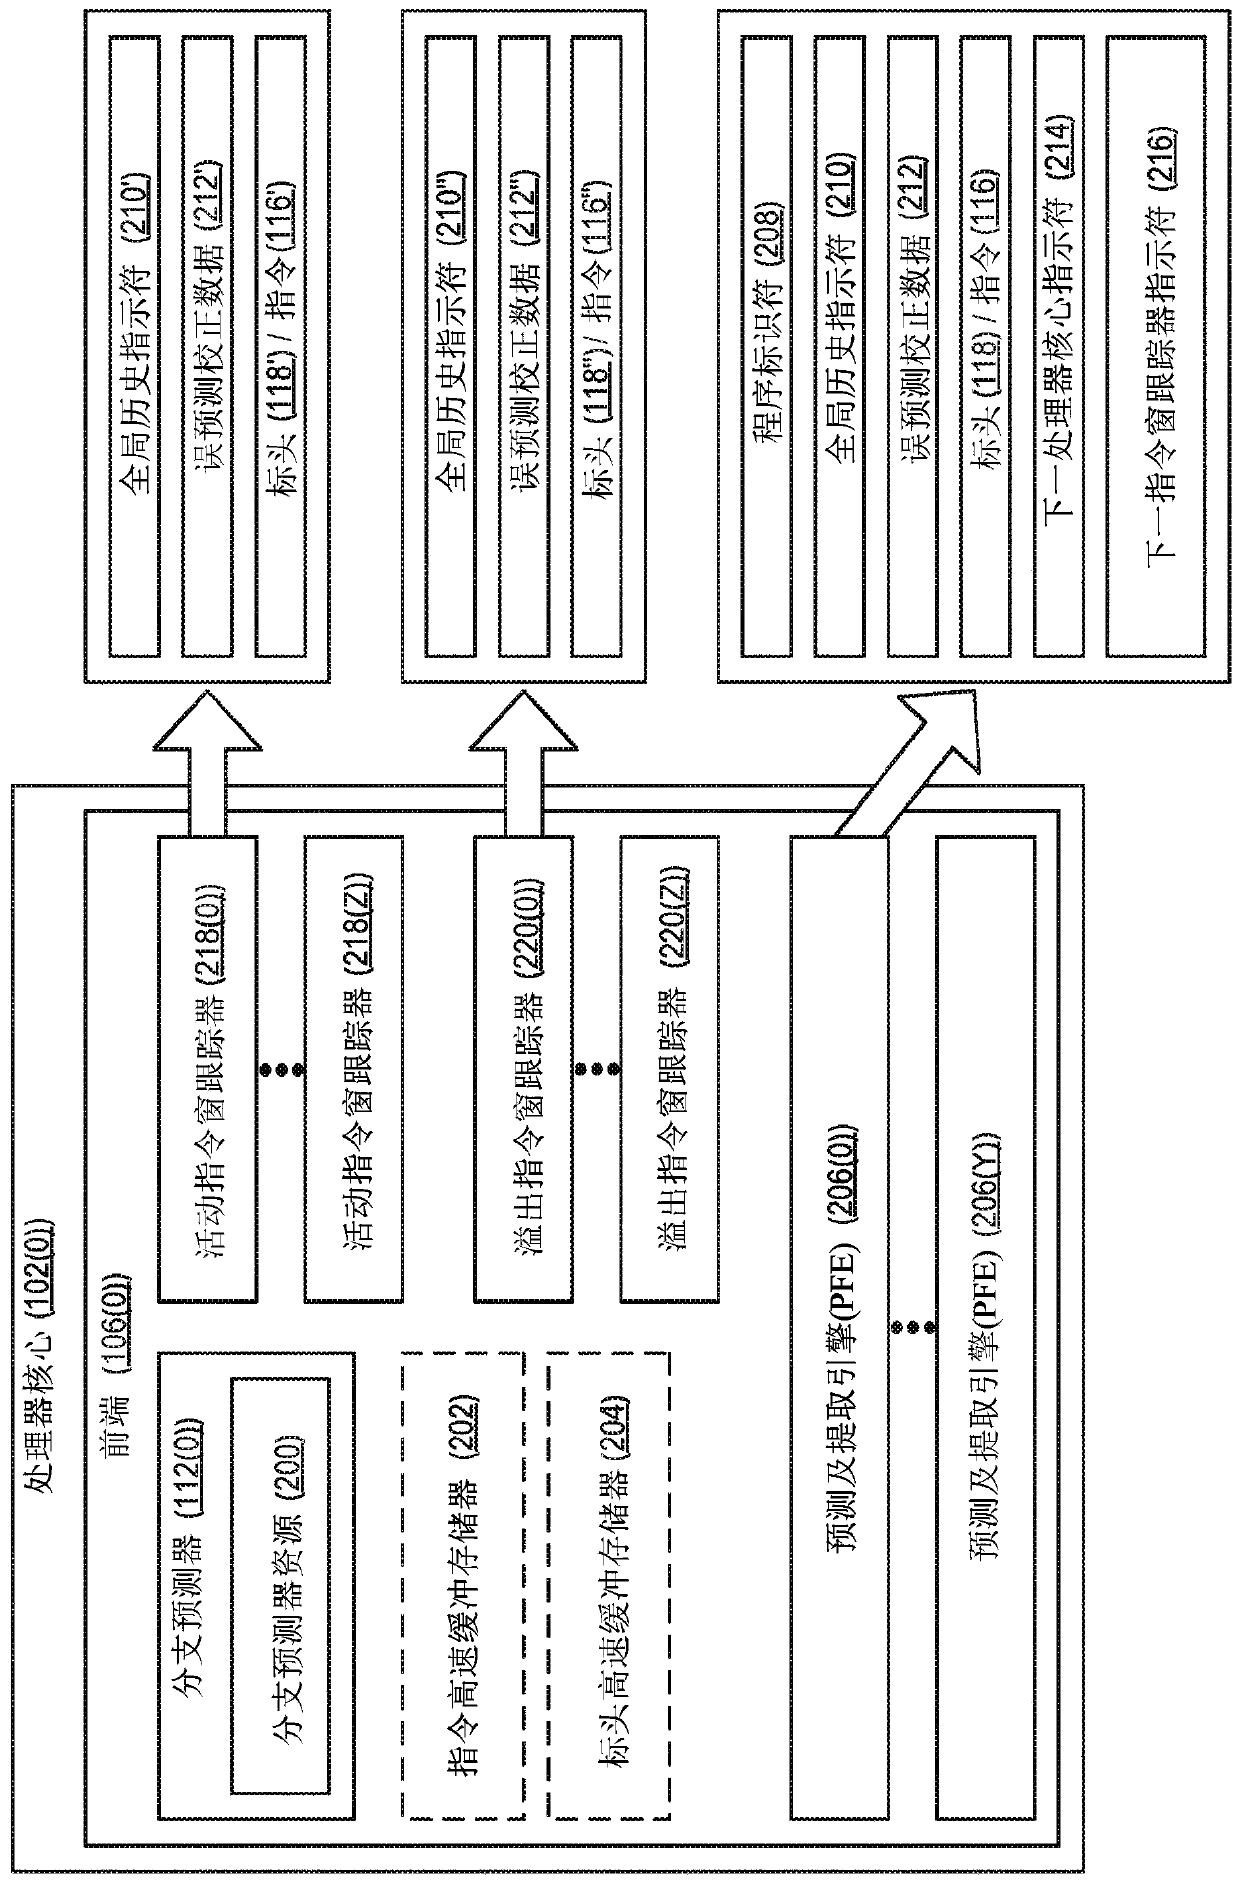 Performing distributed branch prediction using fused processor cores in processor-based systems